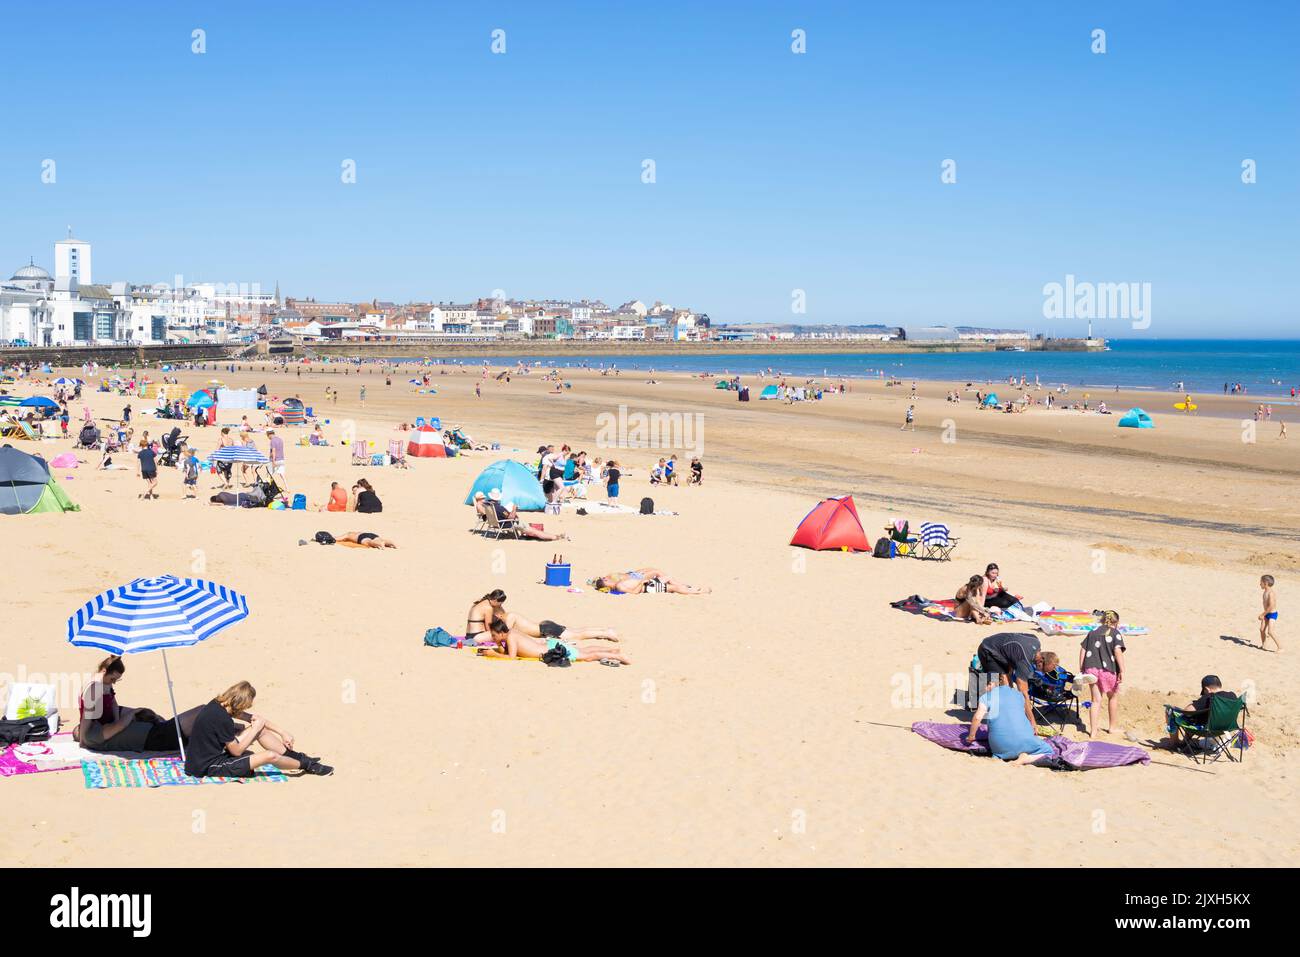 Bridlington South Beach with tourists holidaymakers and people sunbathing on the beach Bridlington East Riding of Yorkshire England UK GB Europe Stock Photo